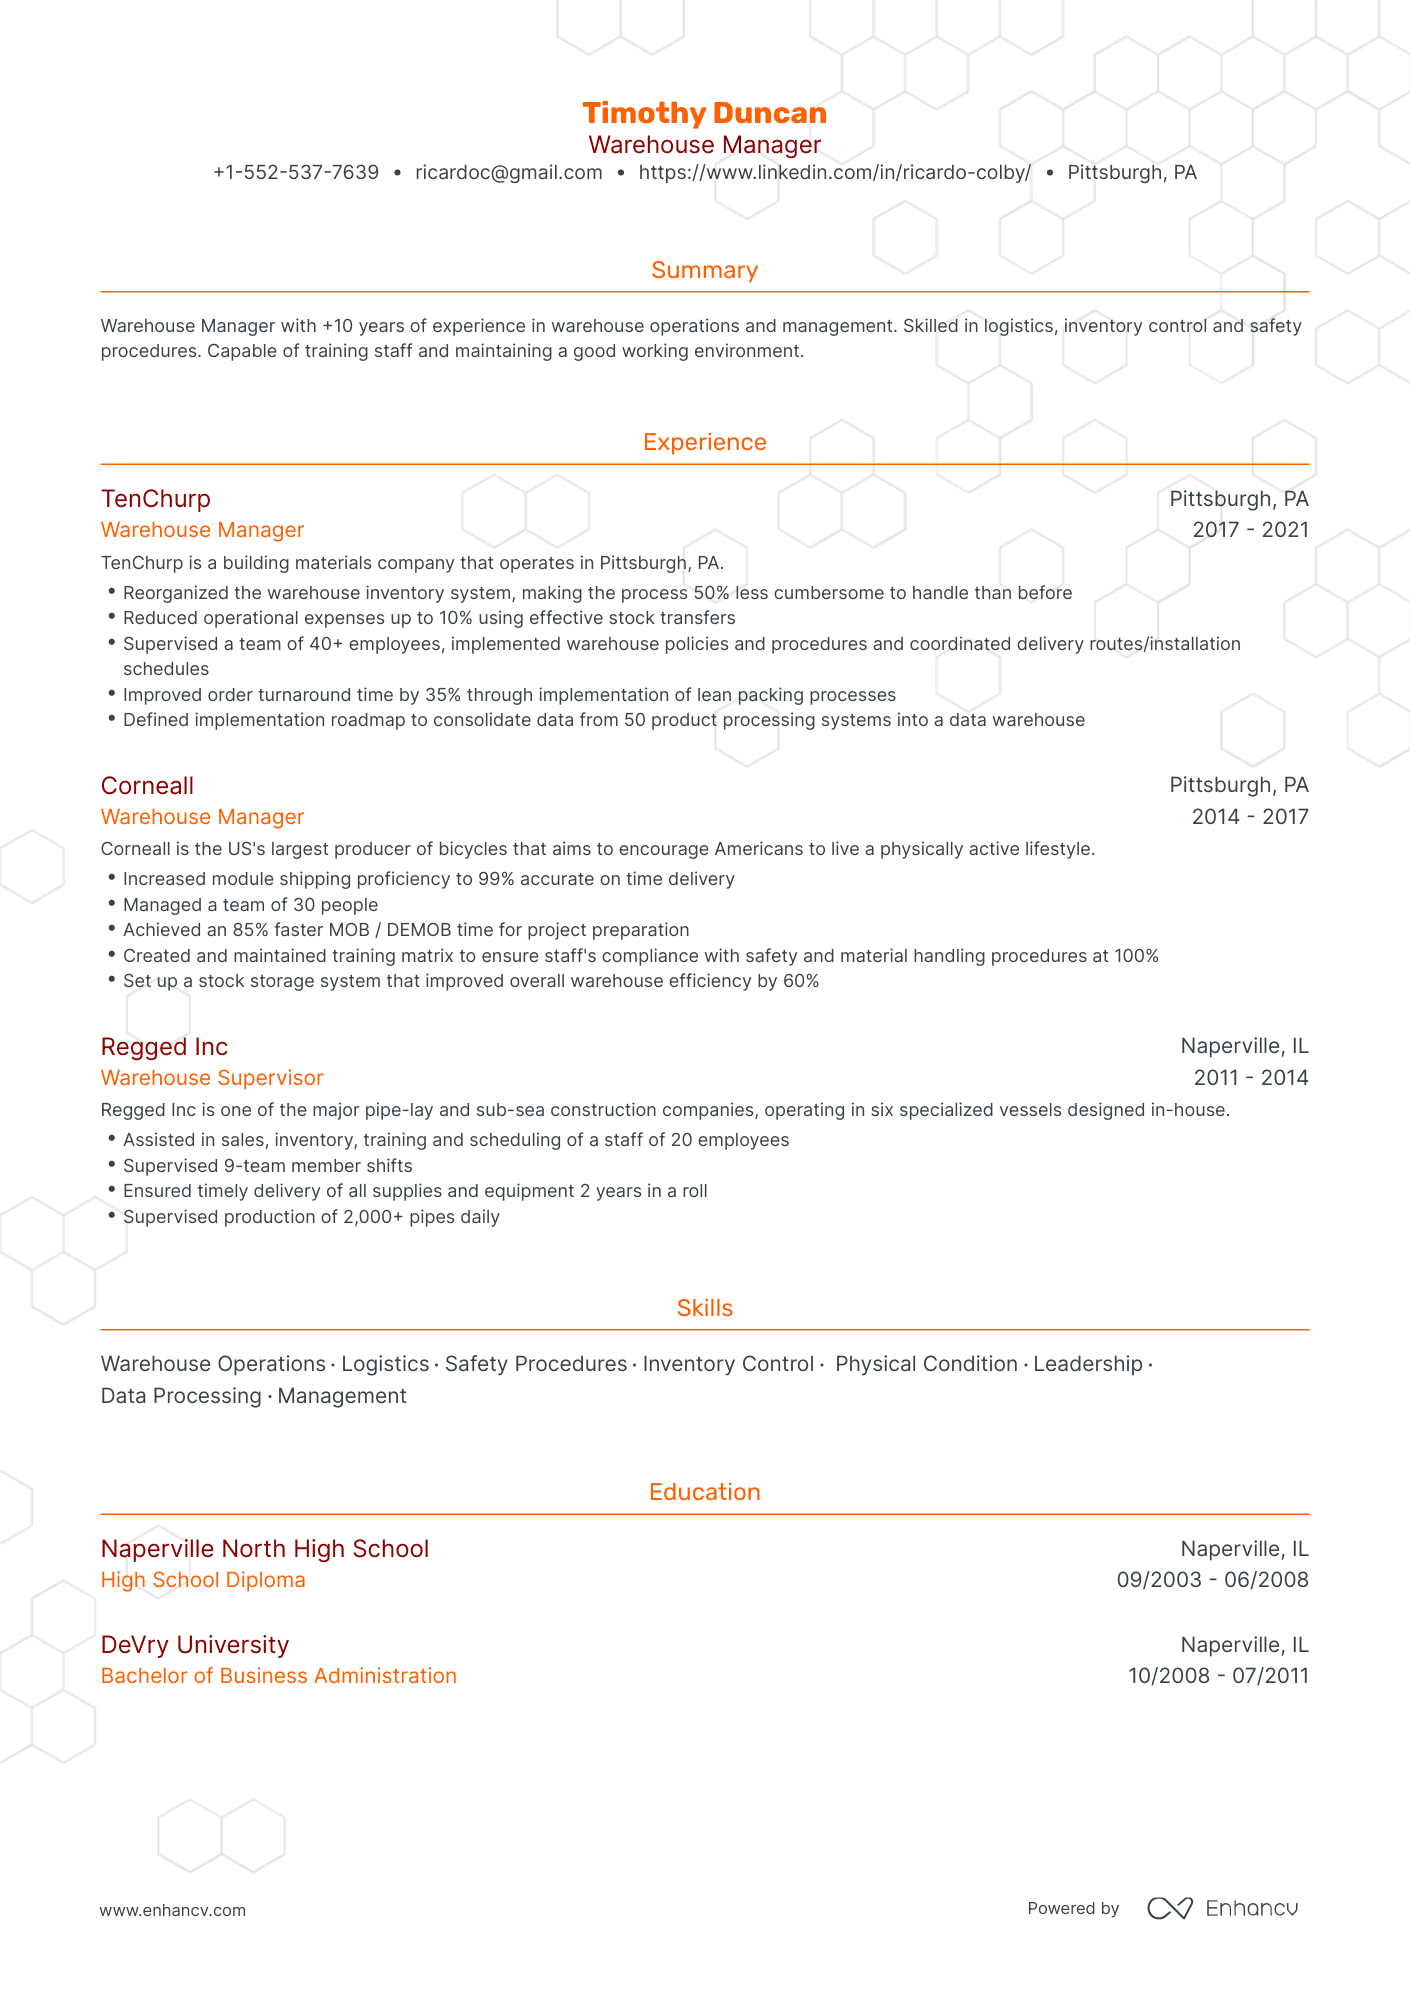 Traditional Warehouse Manager Resume Template